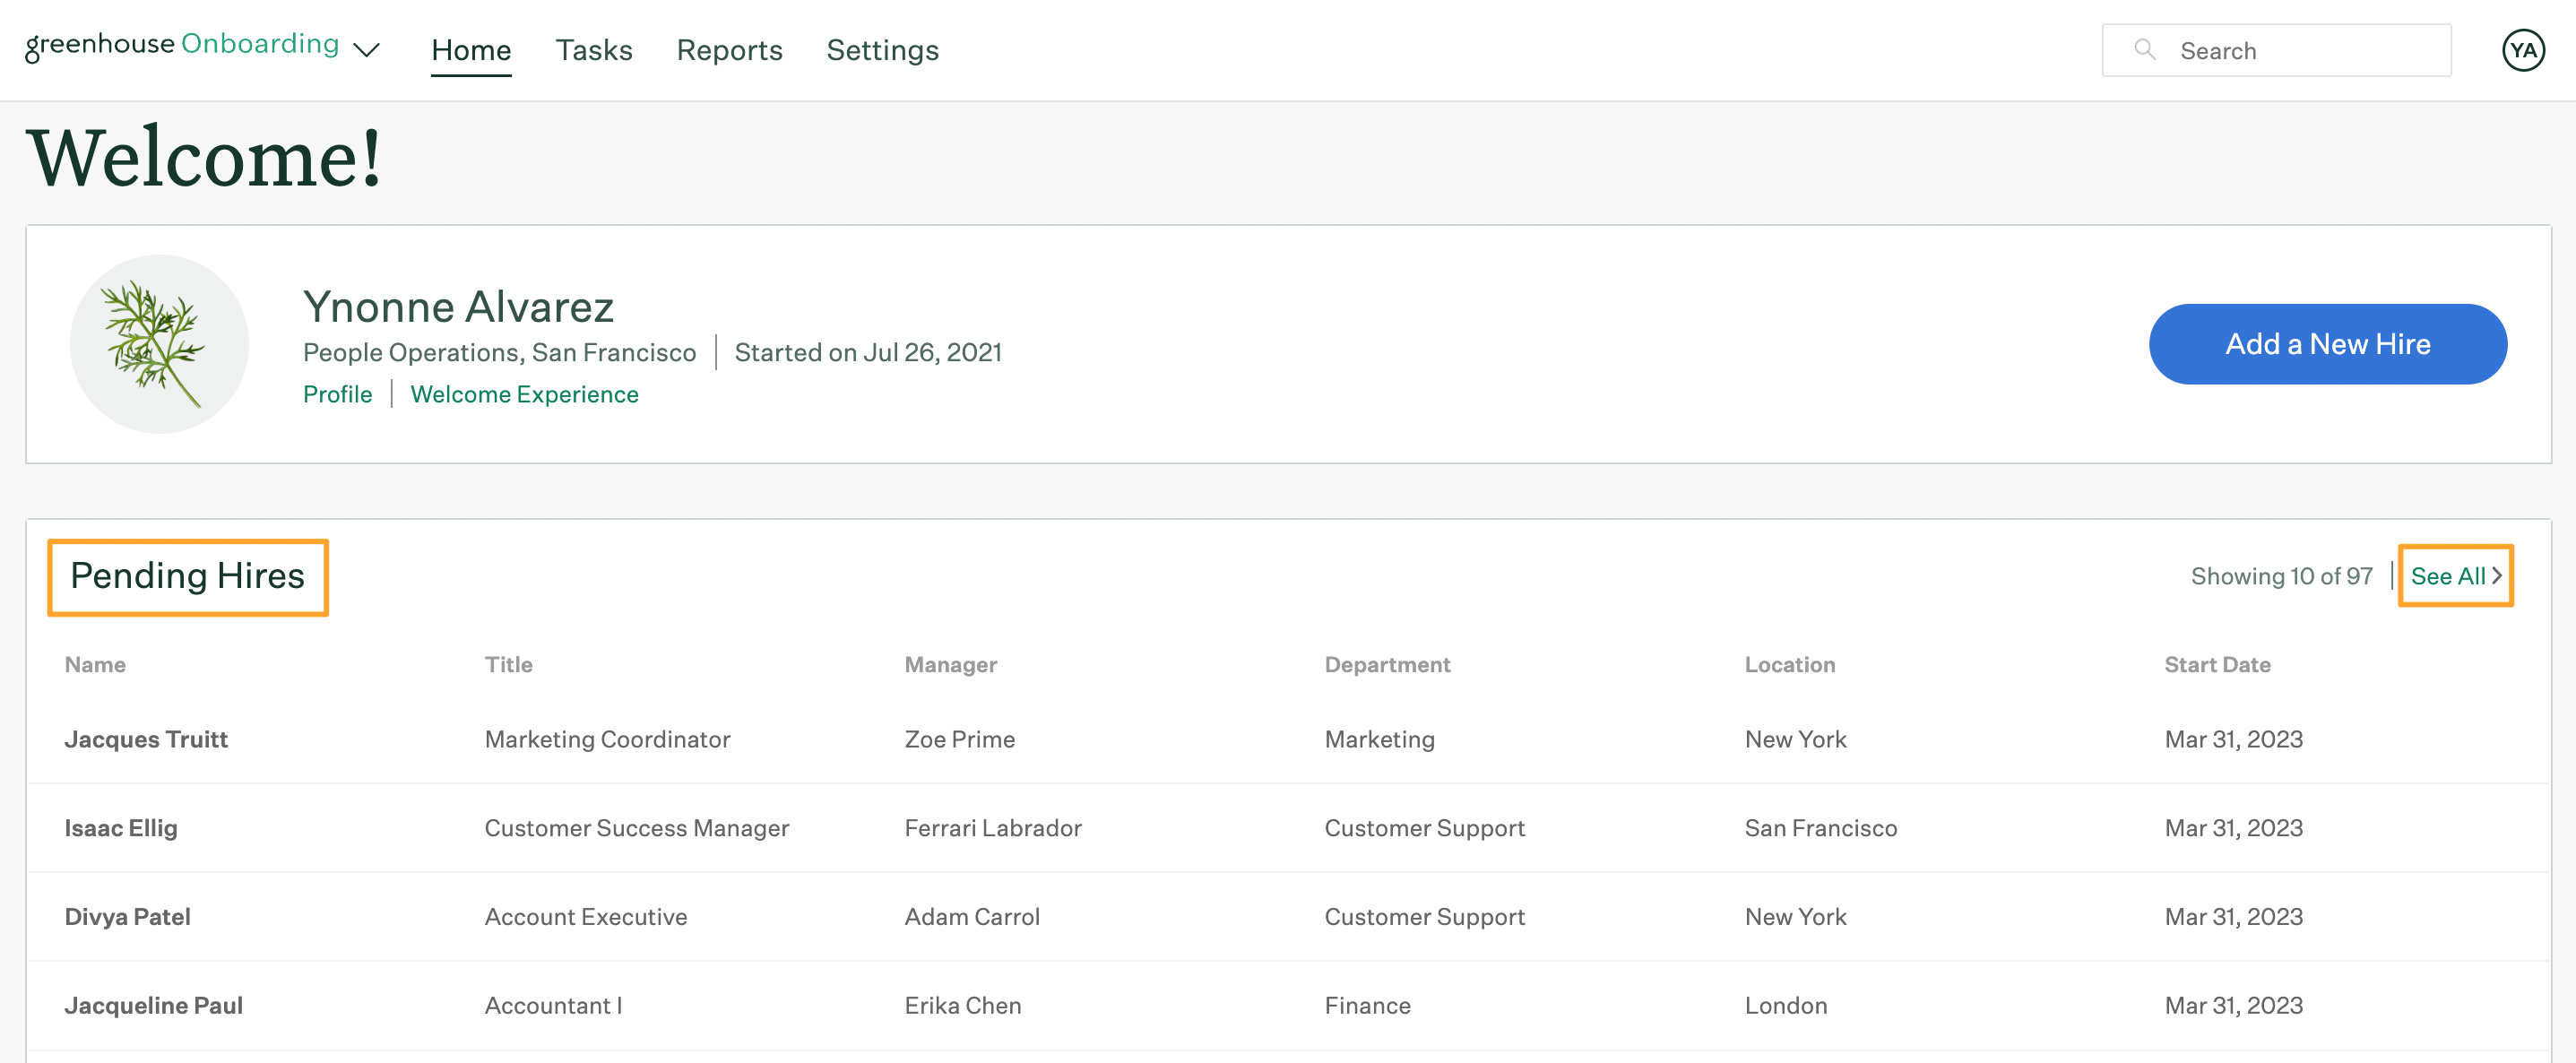 Greenhouse Onboarding homepage with pending hires panel and see all button highlighted